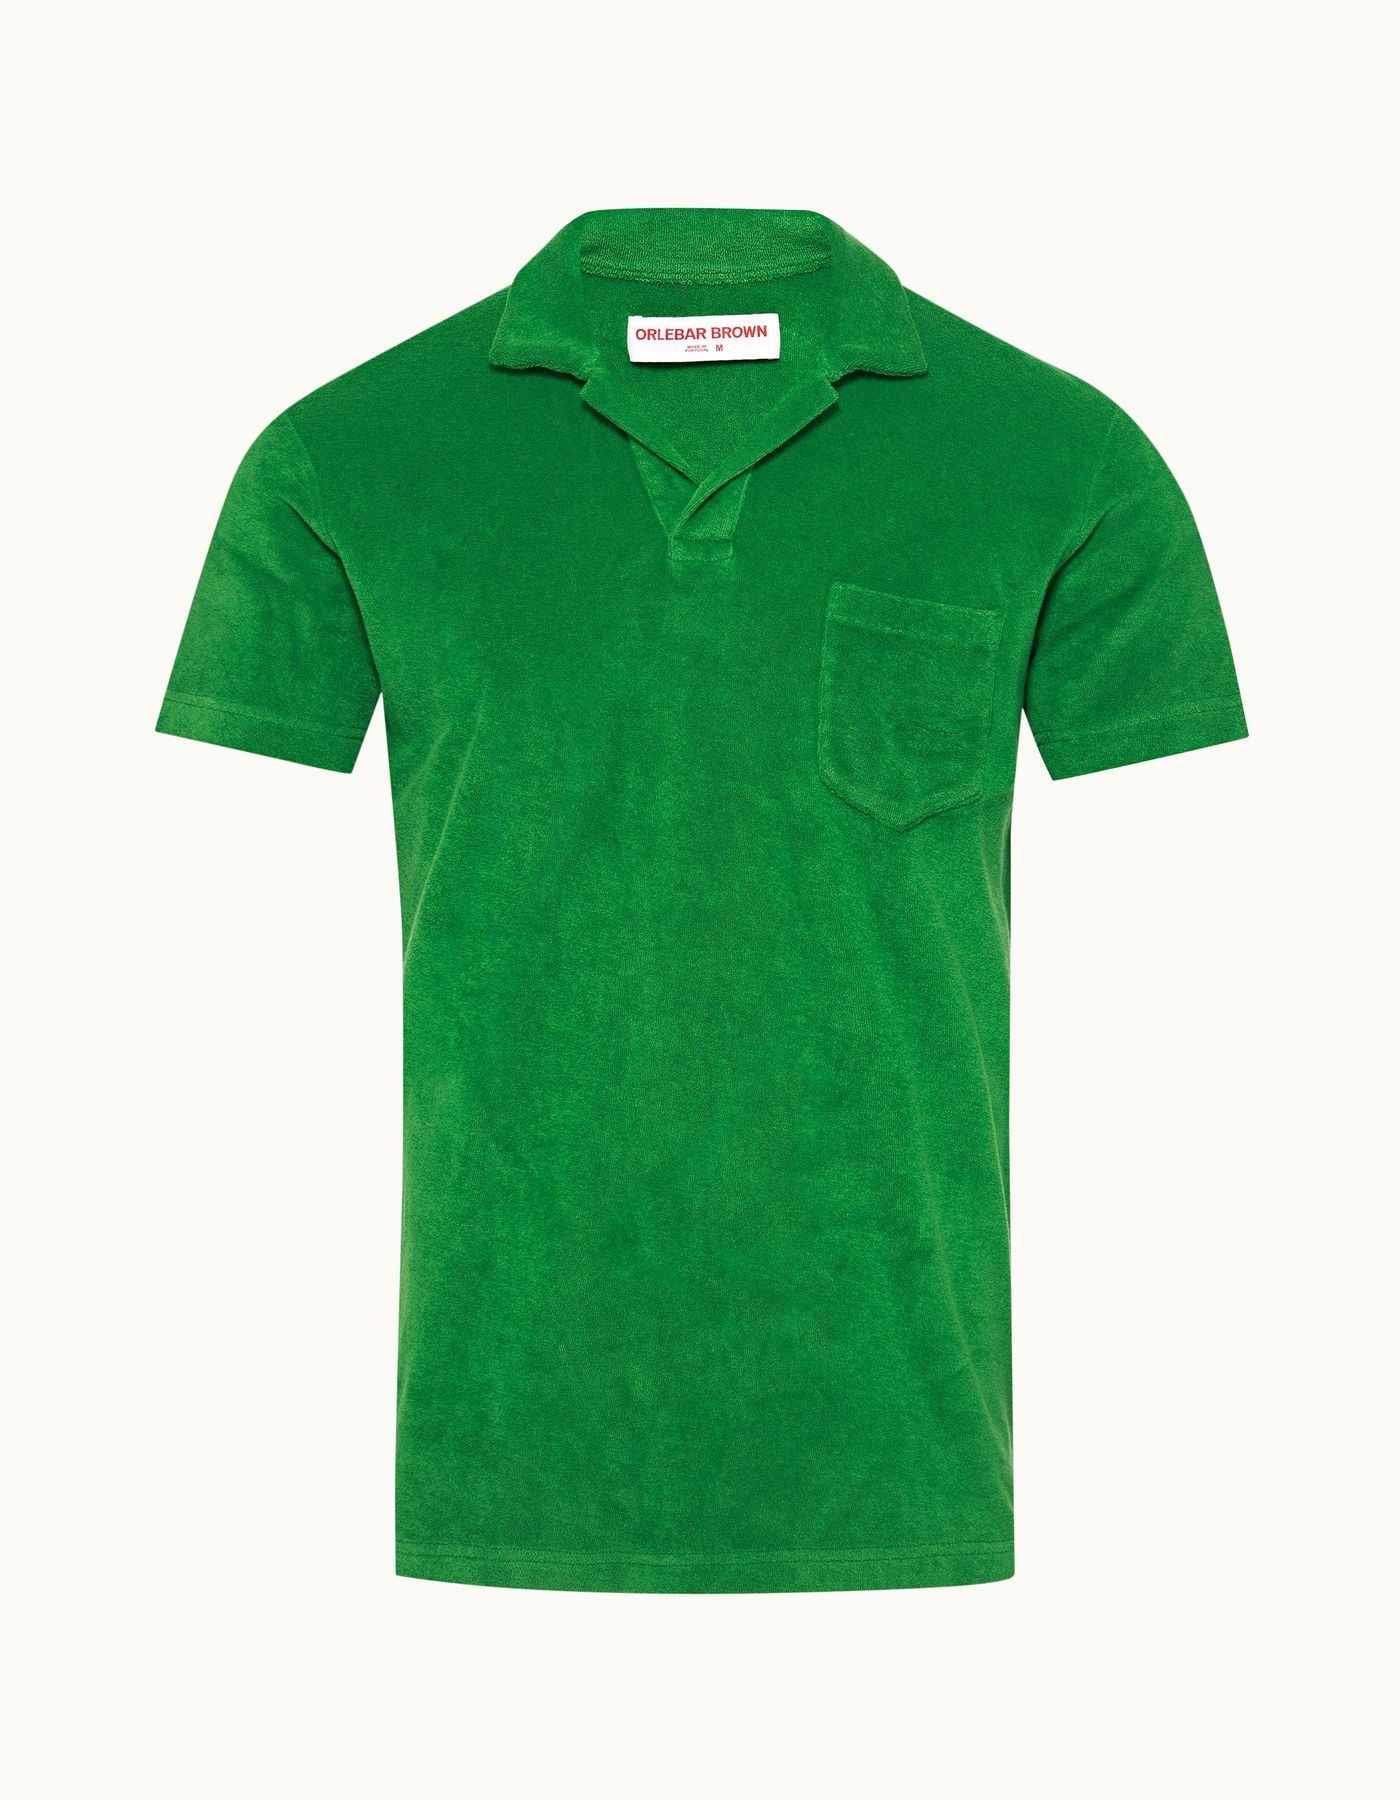 Terry Towelling - Mens Coastal Garden Tailored Fit Organic Cotton Towelling Resort Polo Shirt